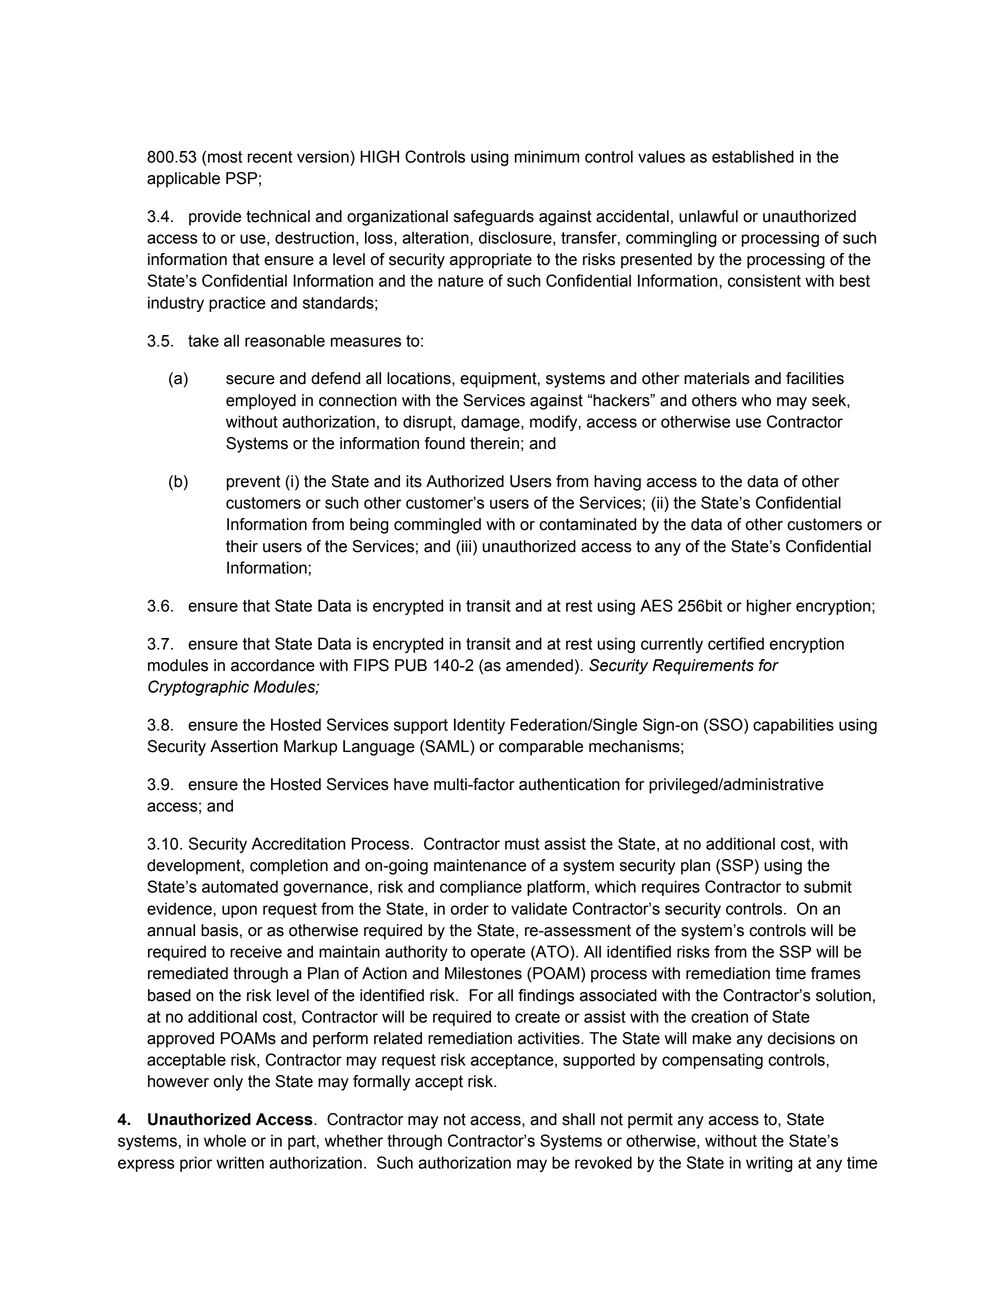 Page 71 from State of Michigan 2020 Kaseware contract